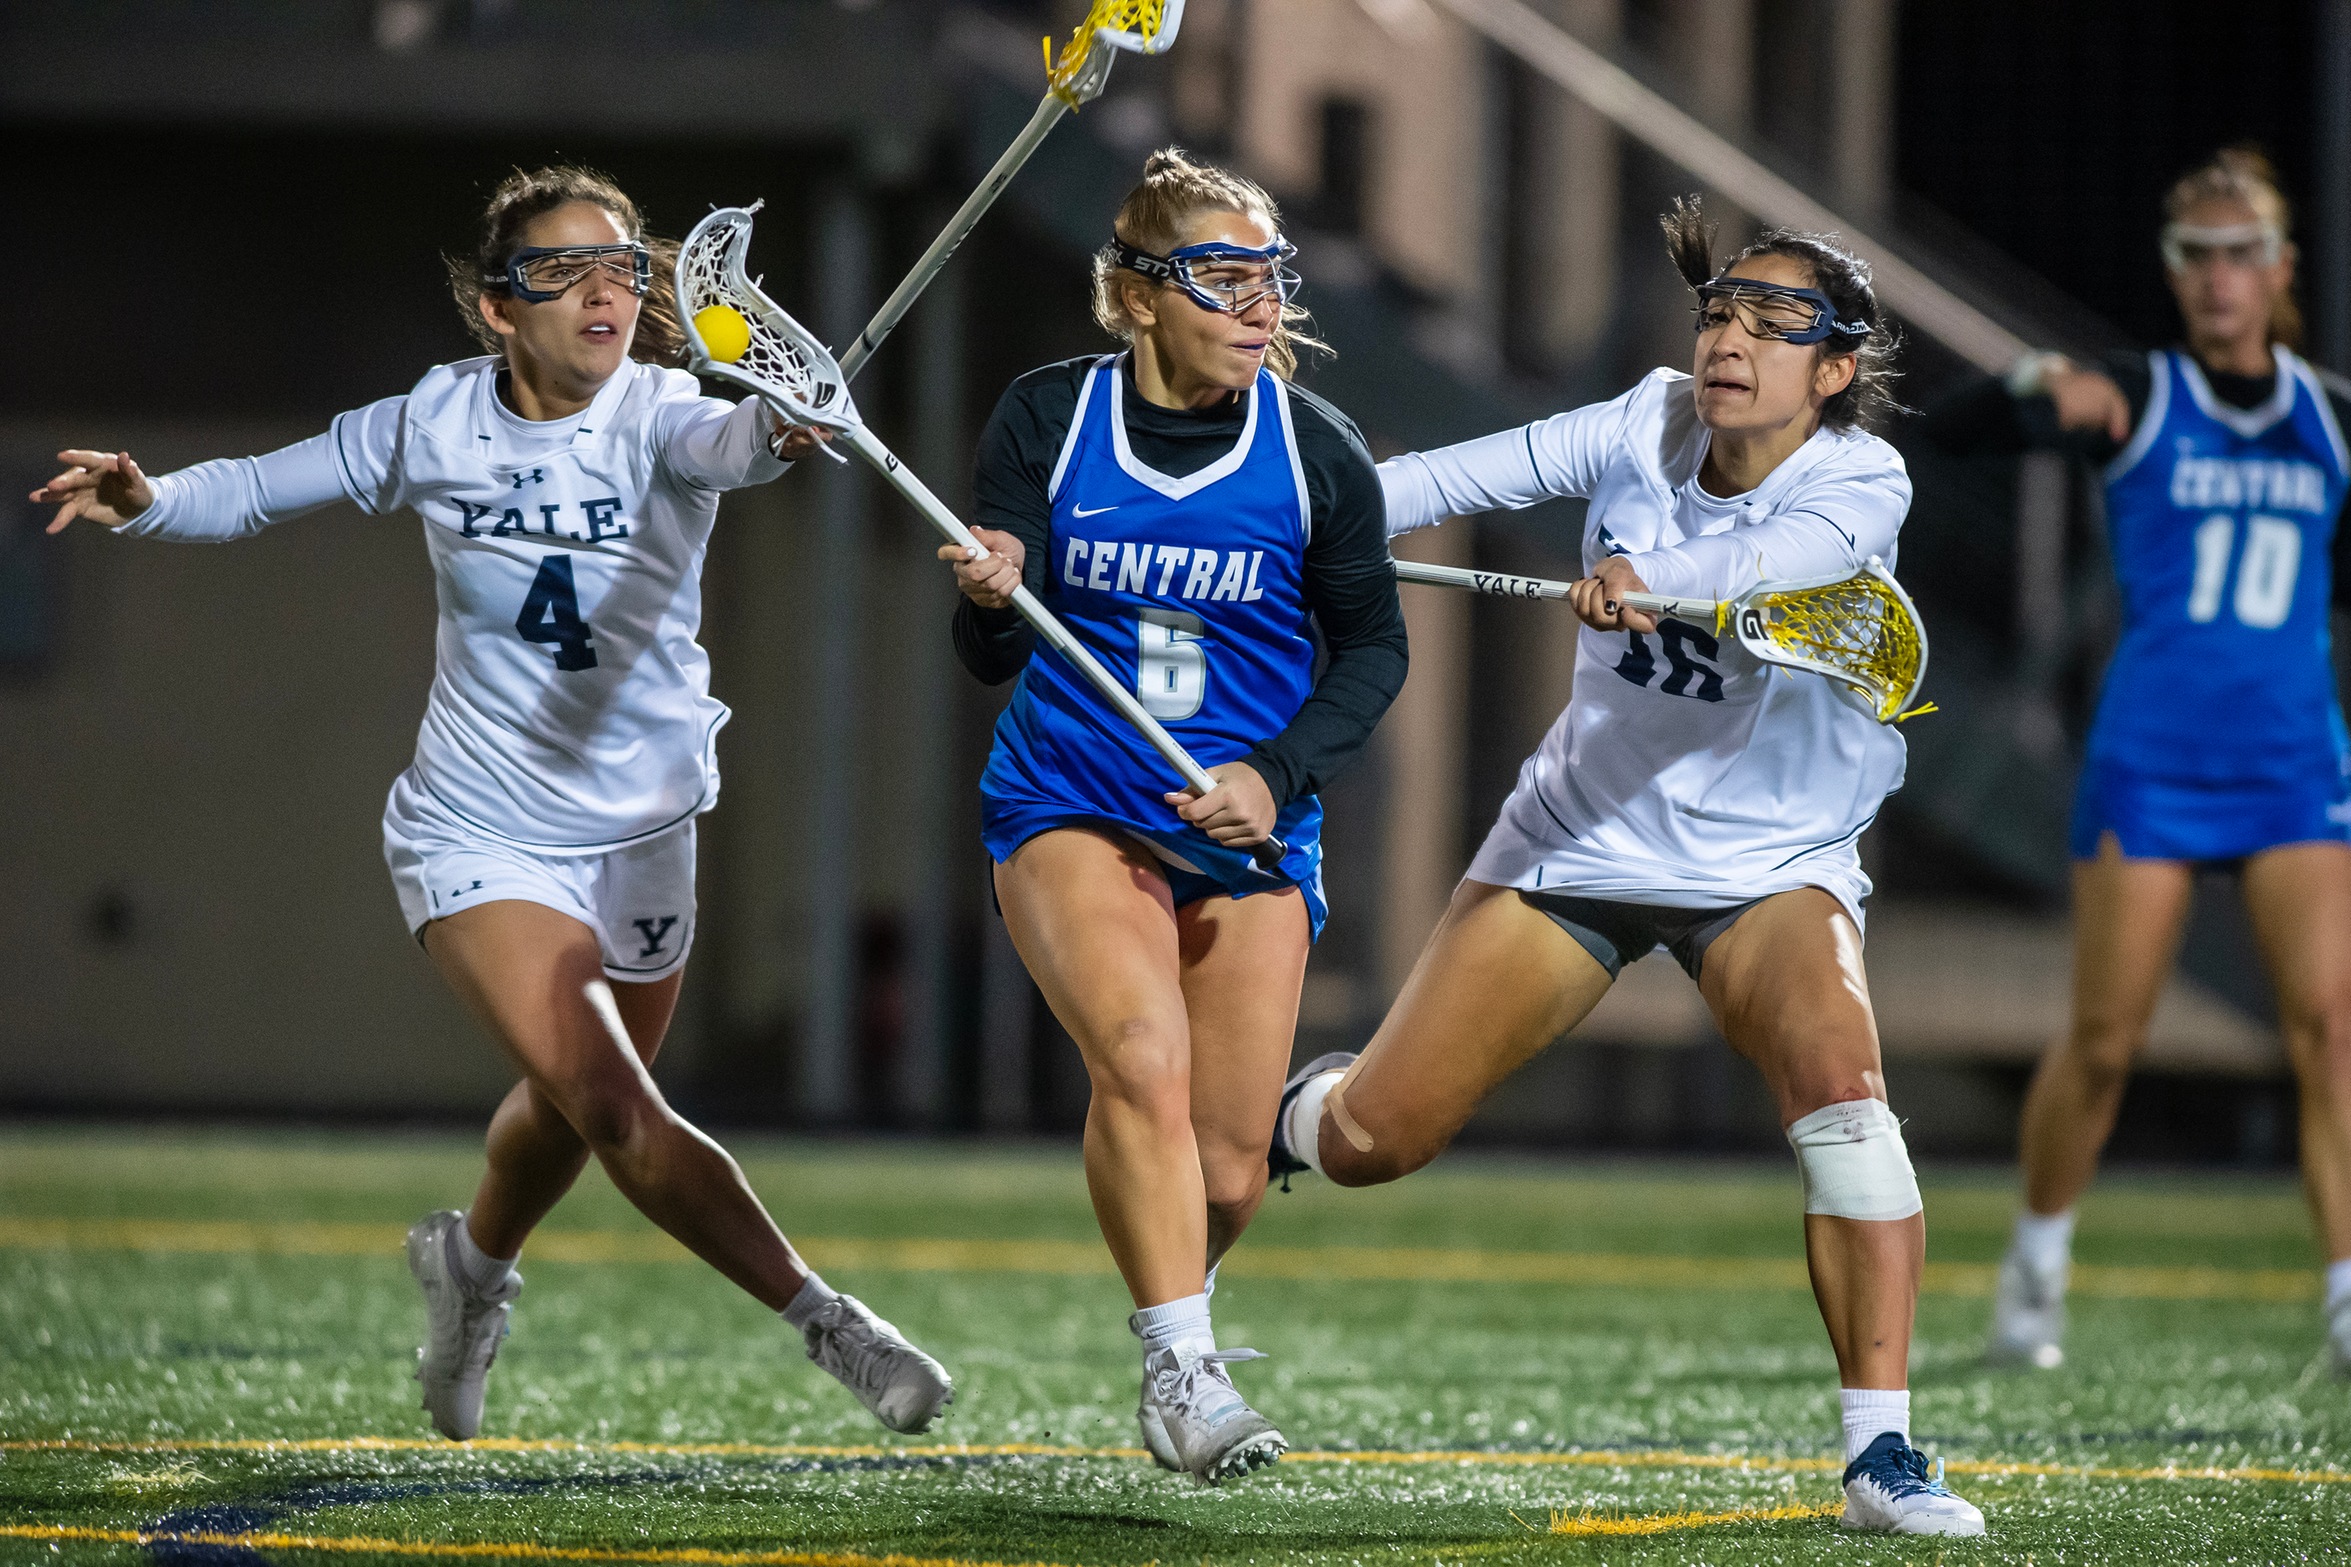 Talie Richardson had a goal, a ground ball and caused turnover at Merrimack (Steve McLaughlin Photography)